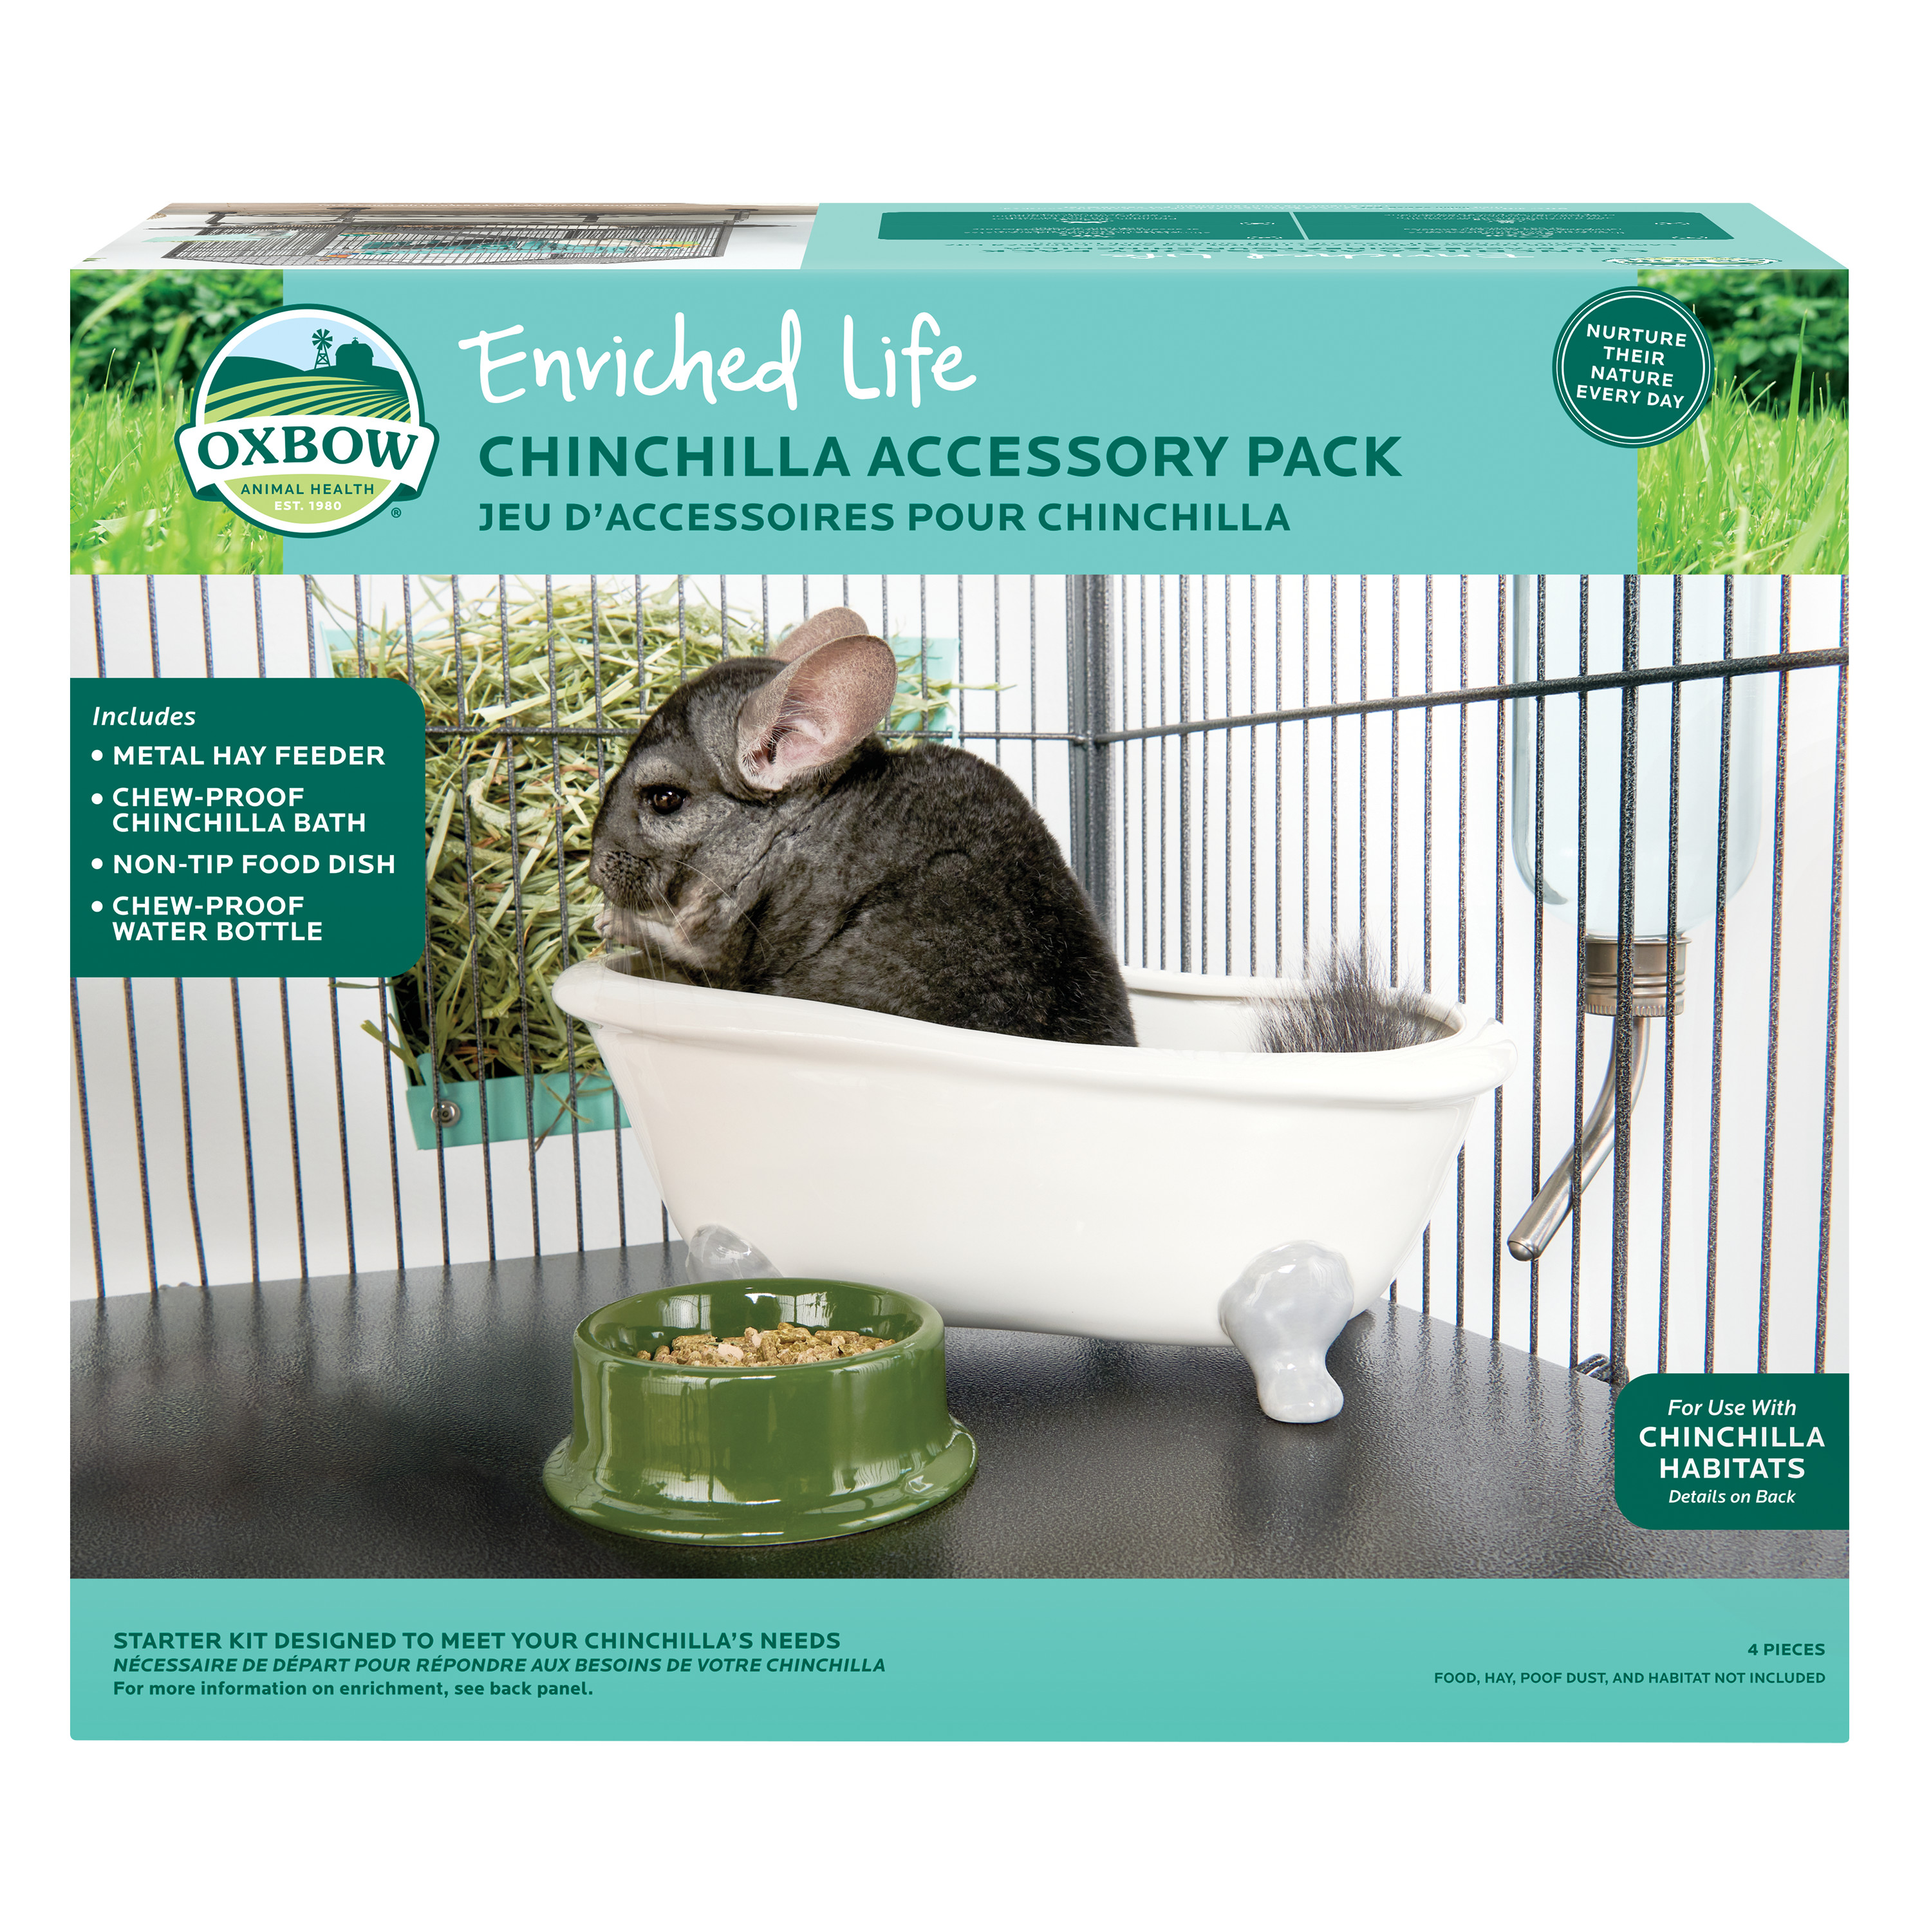 OXBOW Enriched Life Chinchilla Accessory Pack